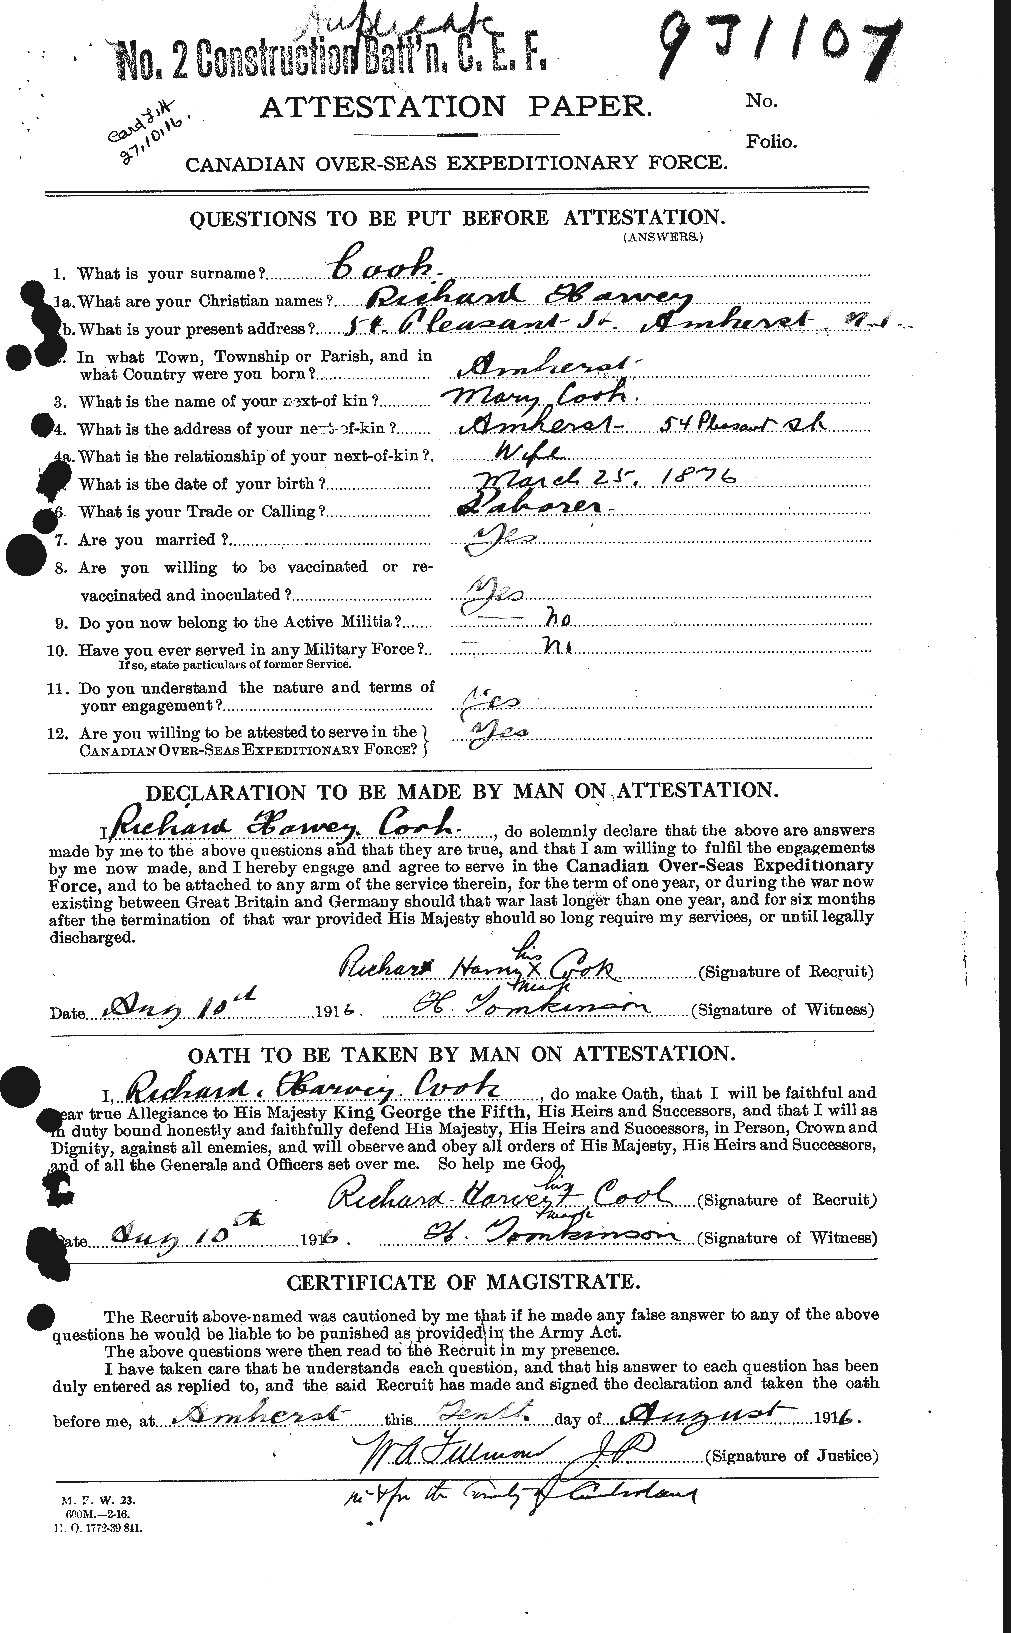 Personnel Records of the First World War - CEF 075180a